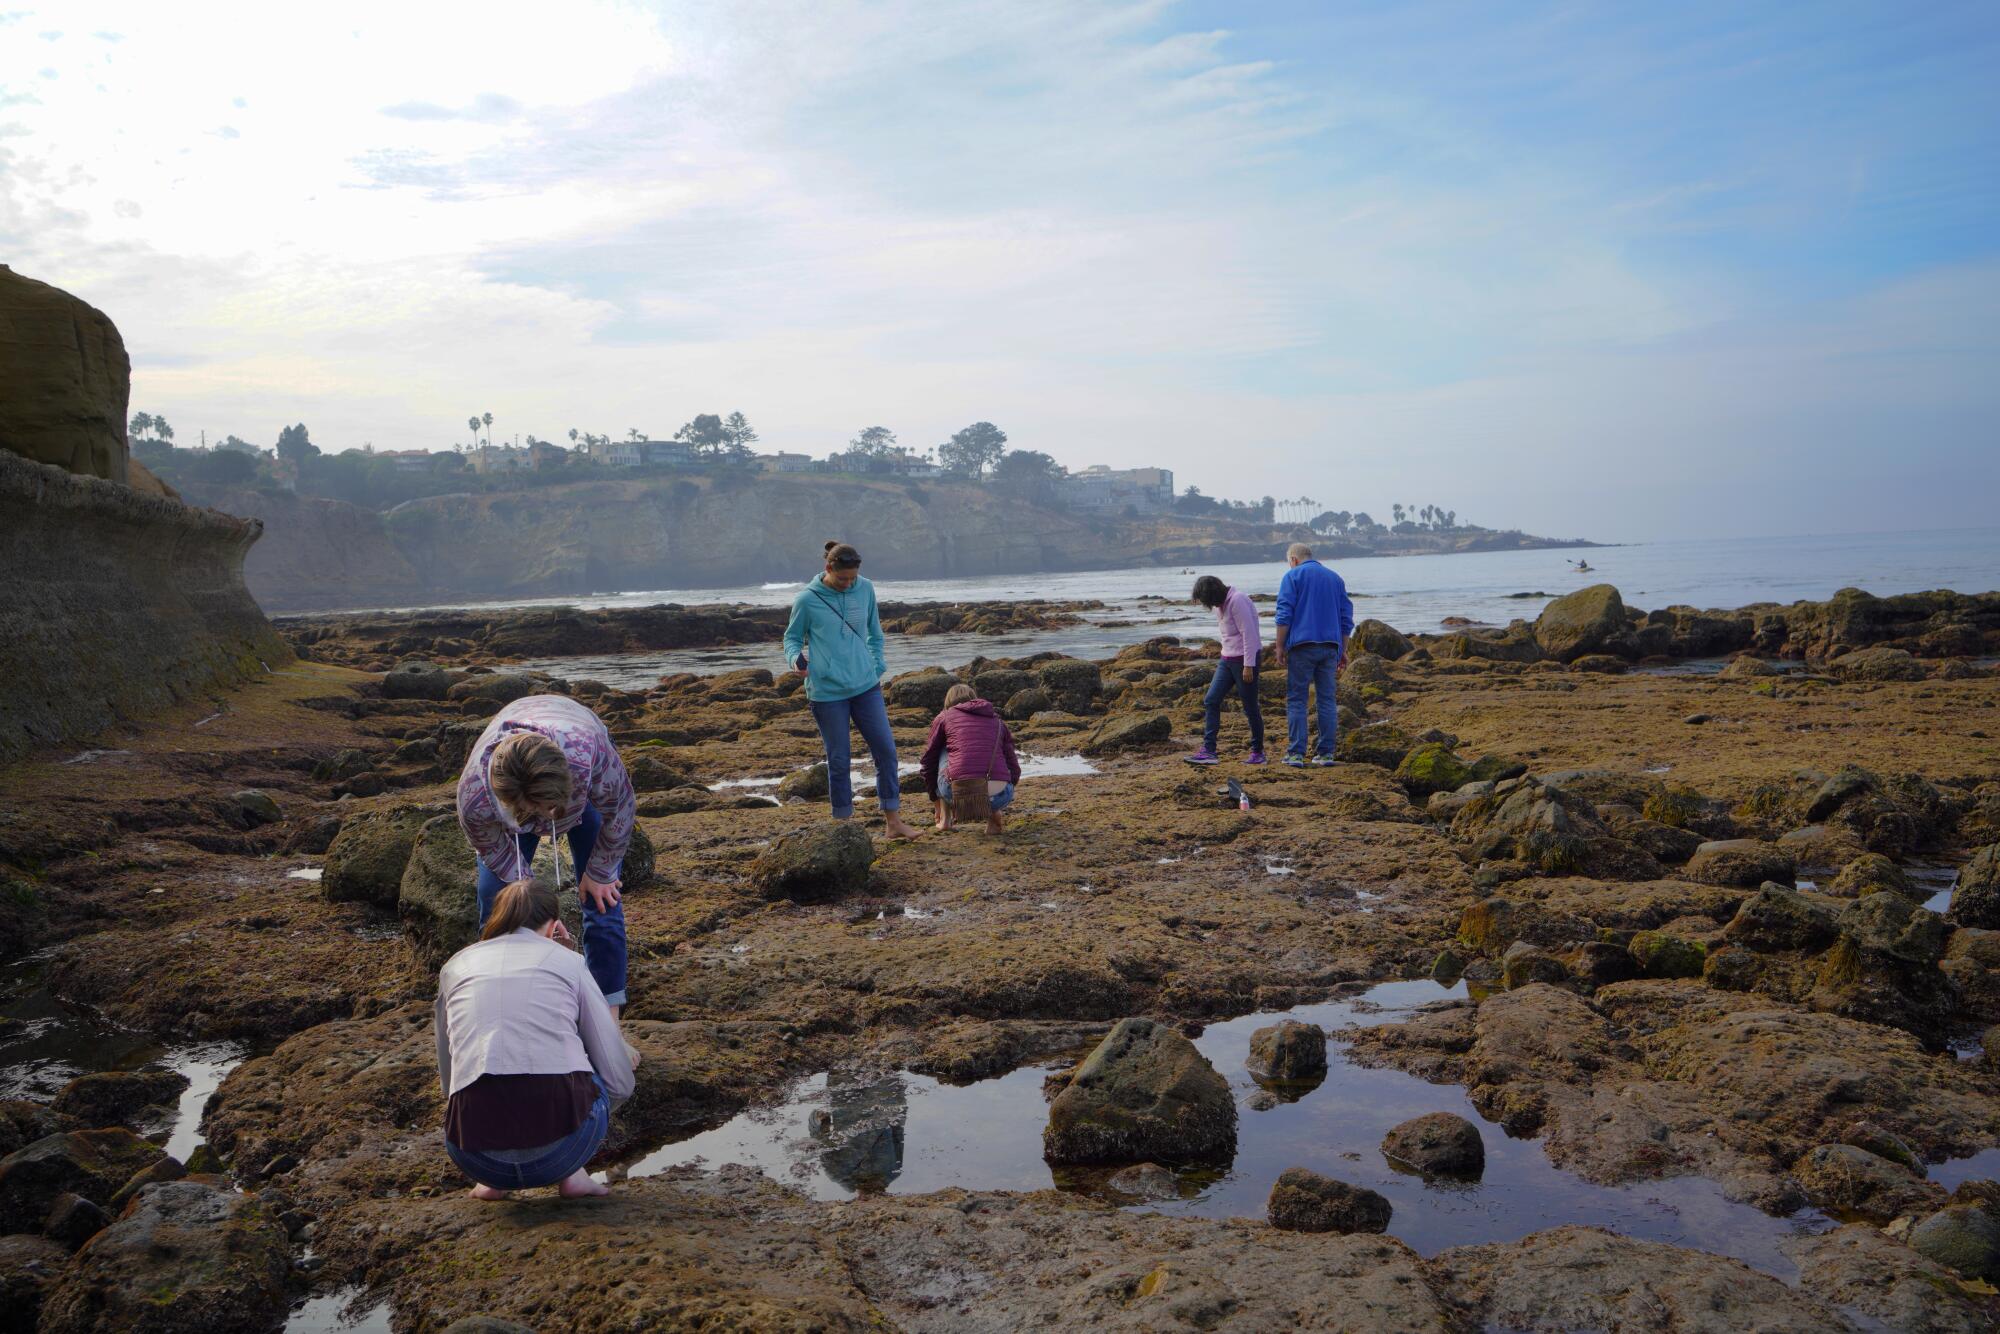 People crouch and walk among tidepools at low tide, with the La Jolla coastline behind them.